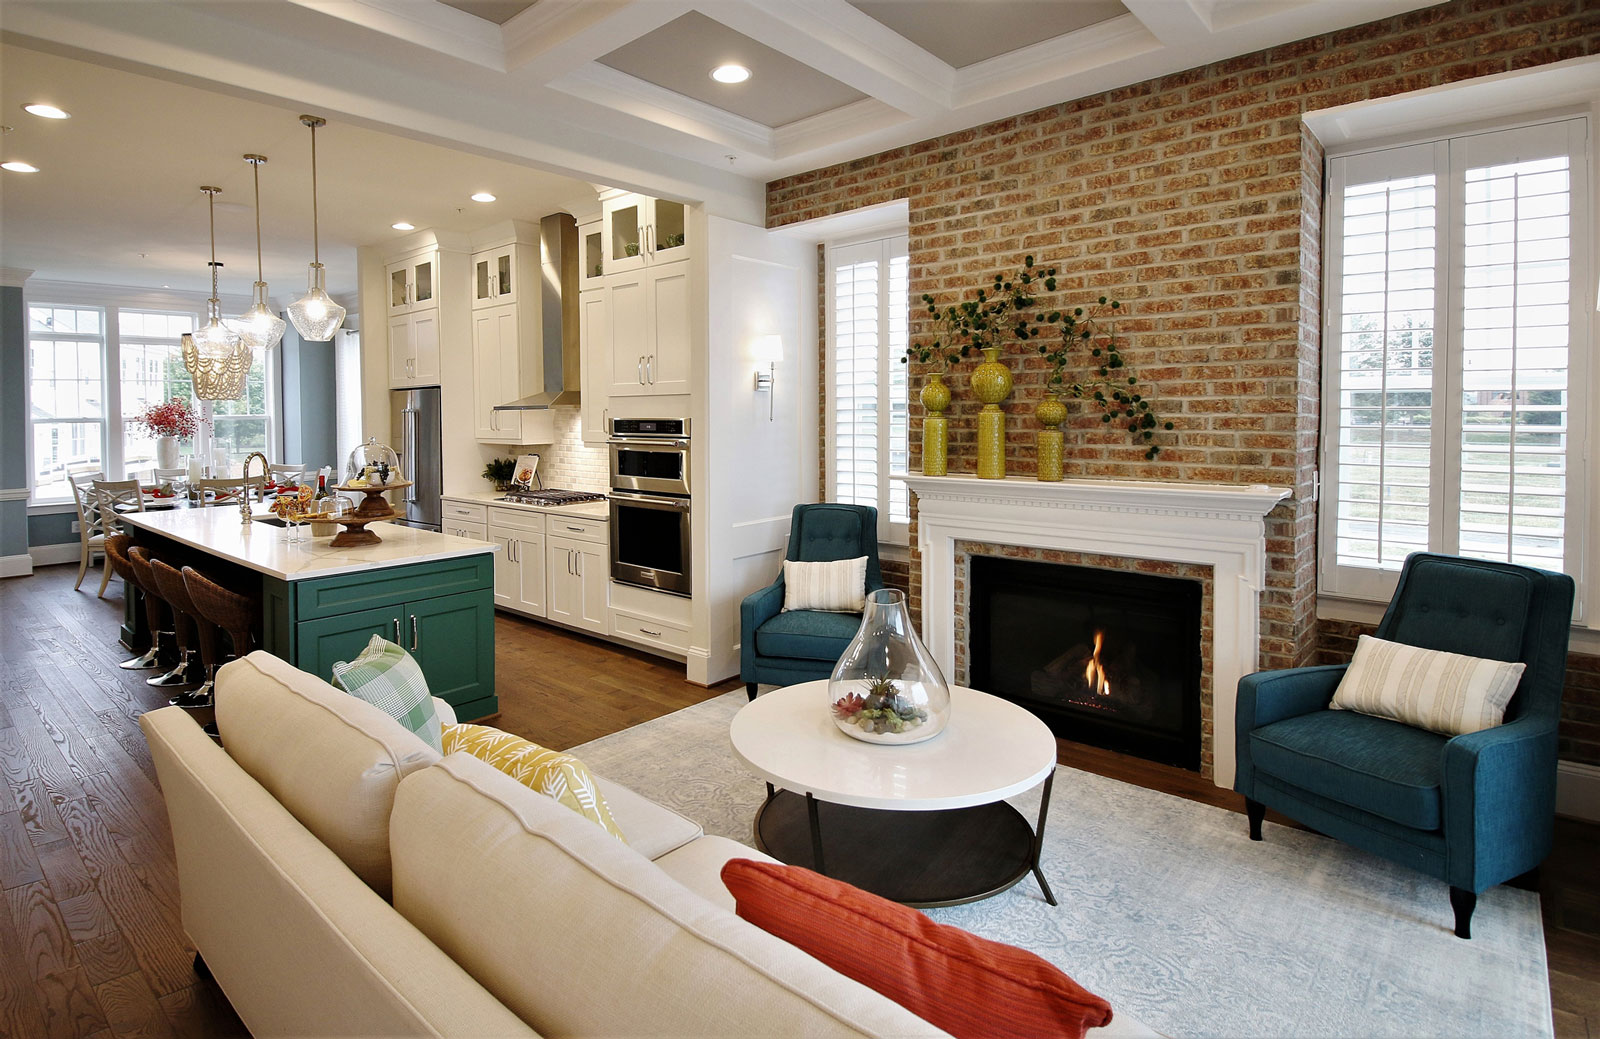 Open floor plan model home in Maryland merchandised with an accent brick wall, fireplace, and classic kitchen.